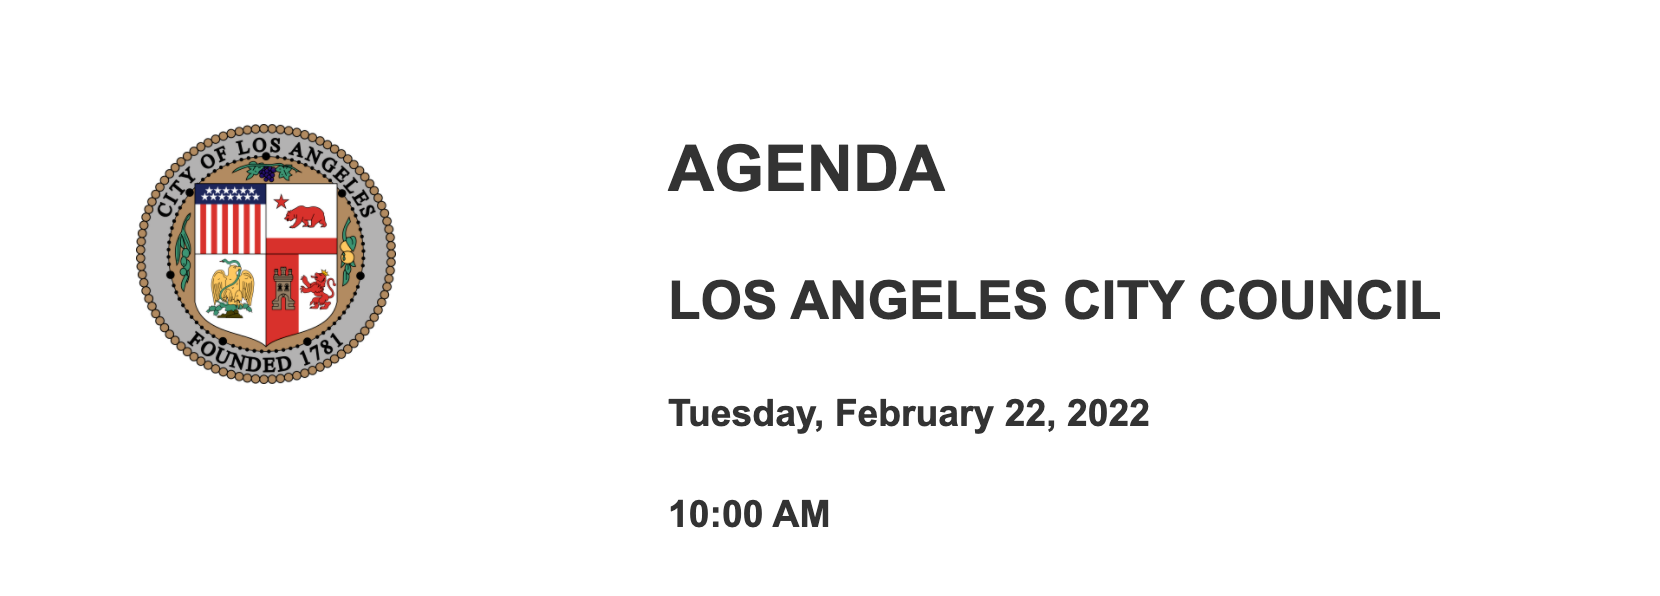 Action Alert: Please call into the LA City Council Meeting TOMORROW at 10AM!